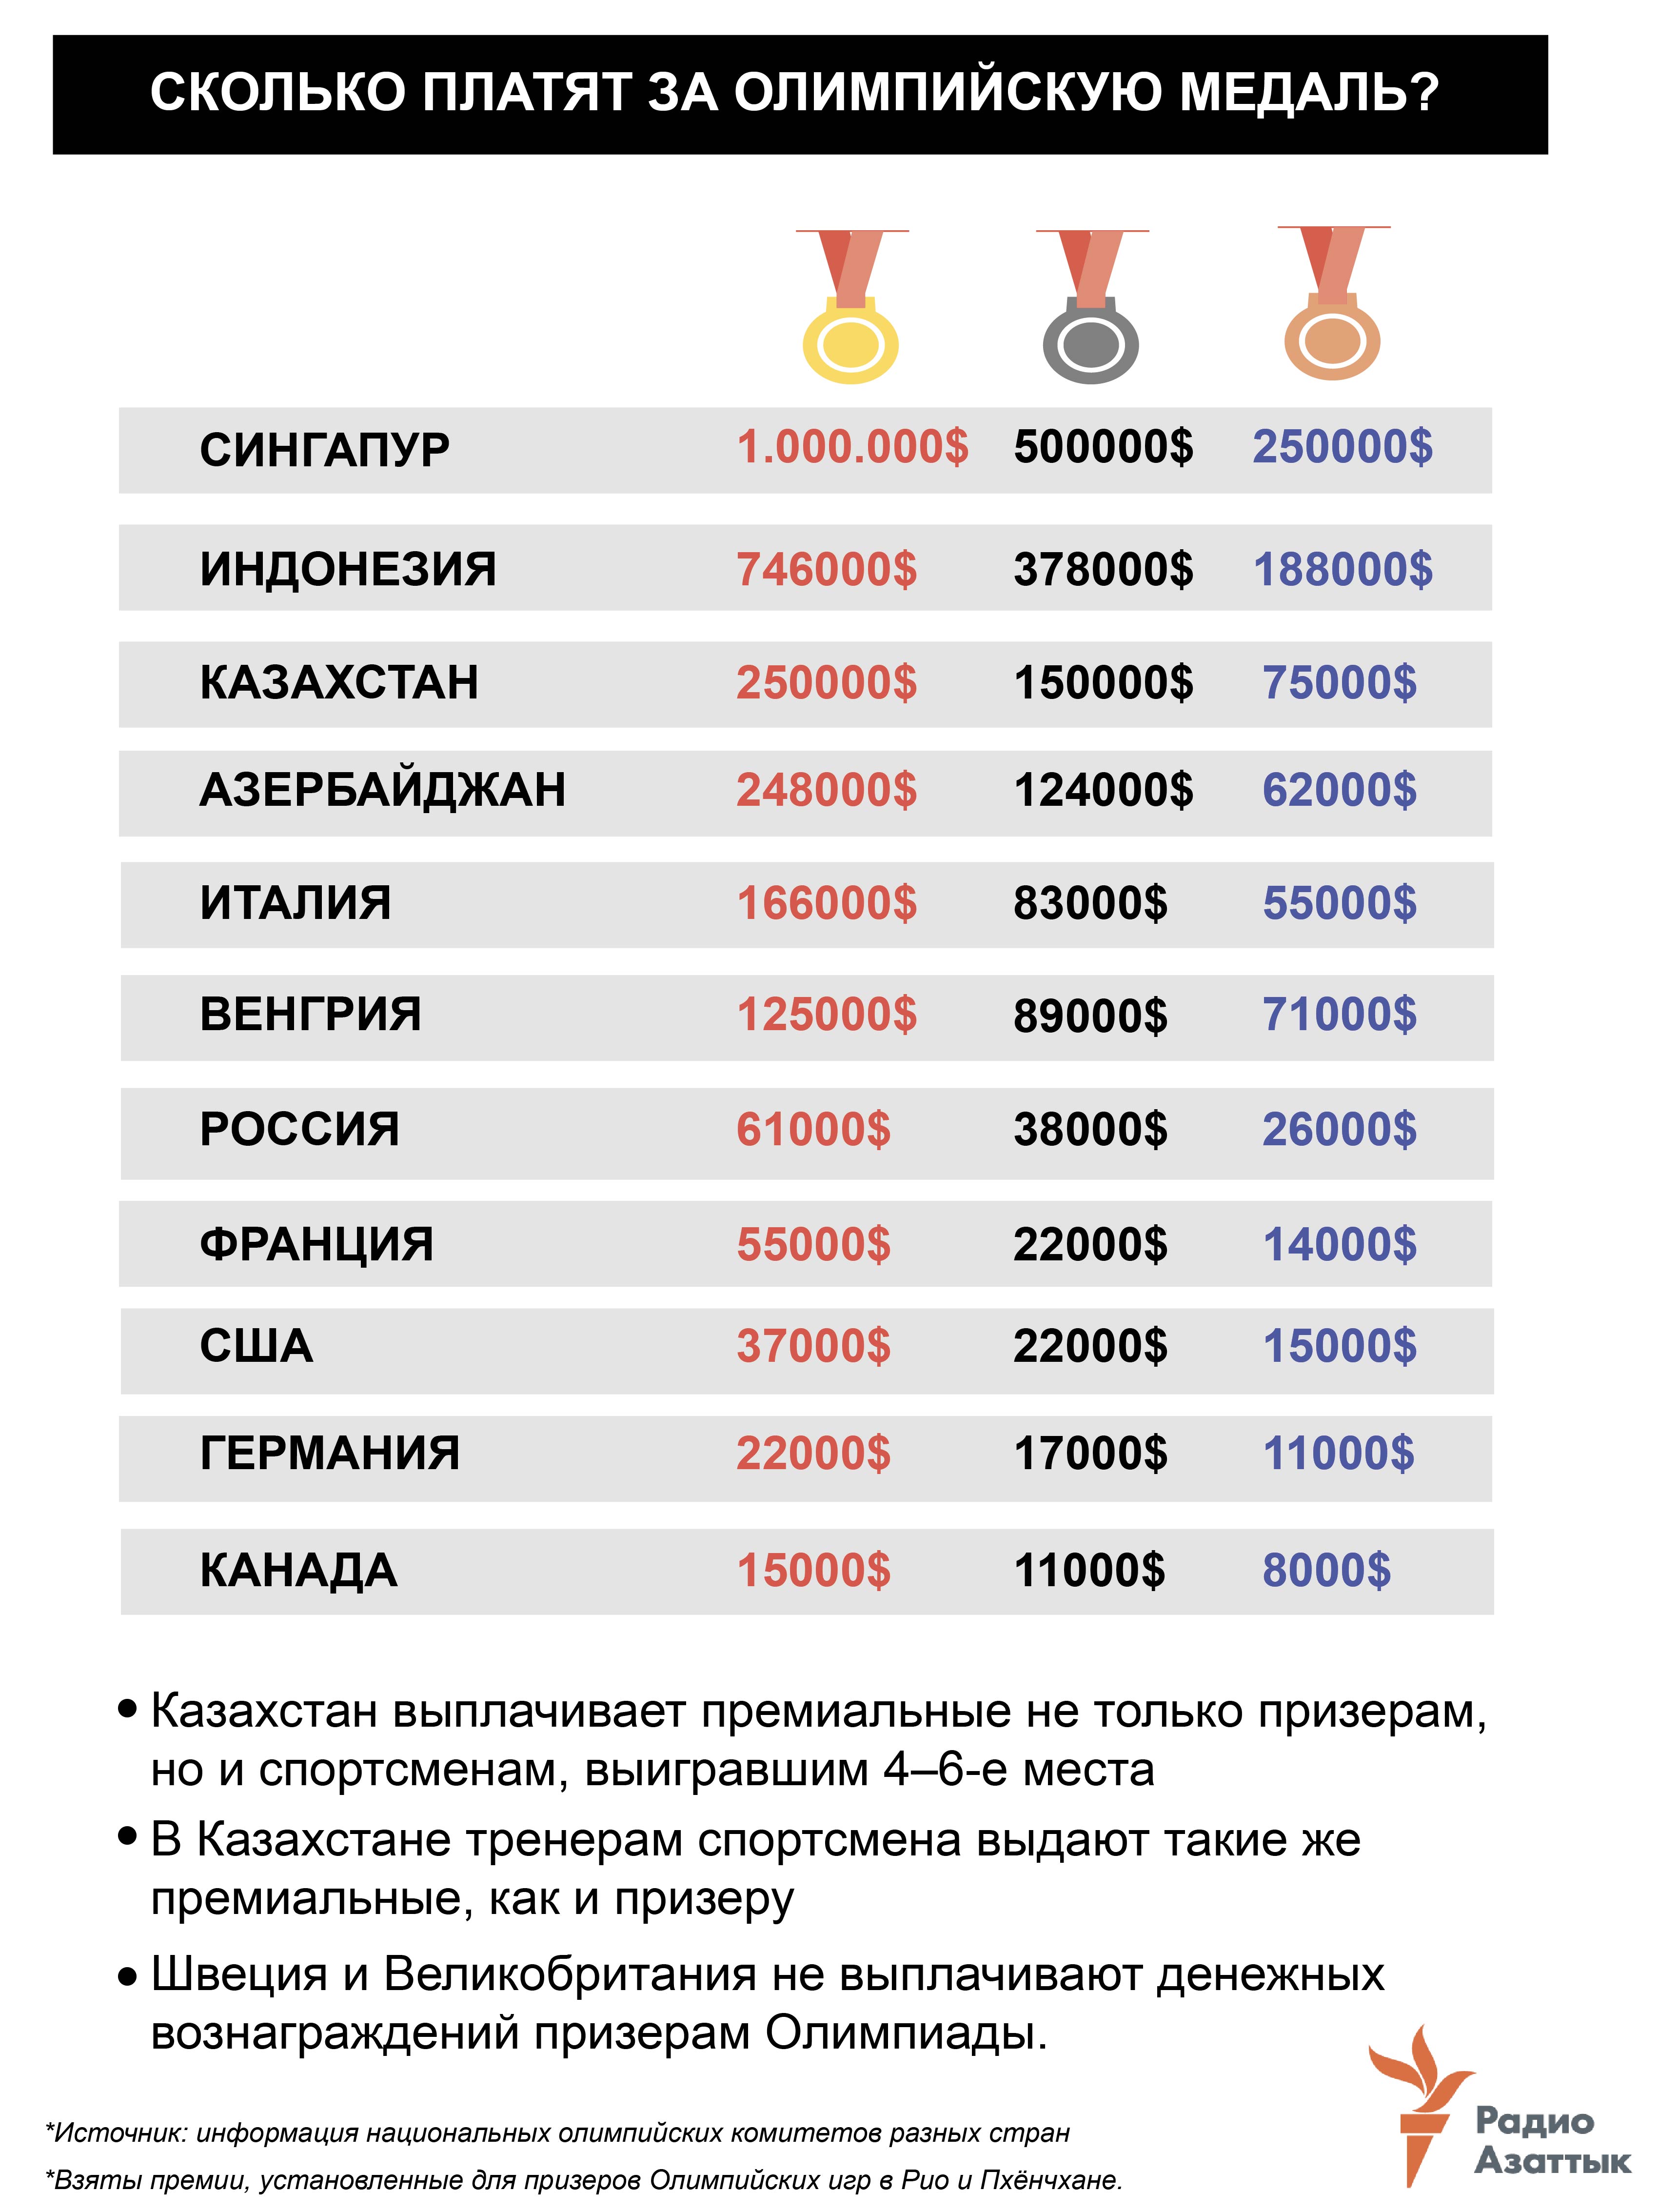 infographic about olympic medal prize